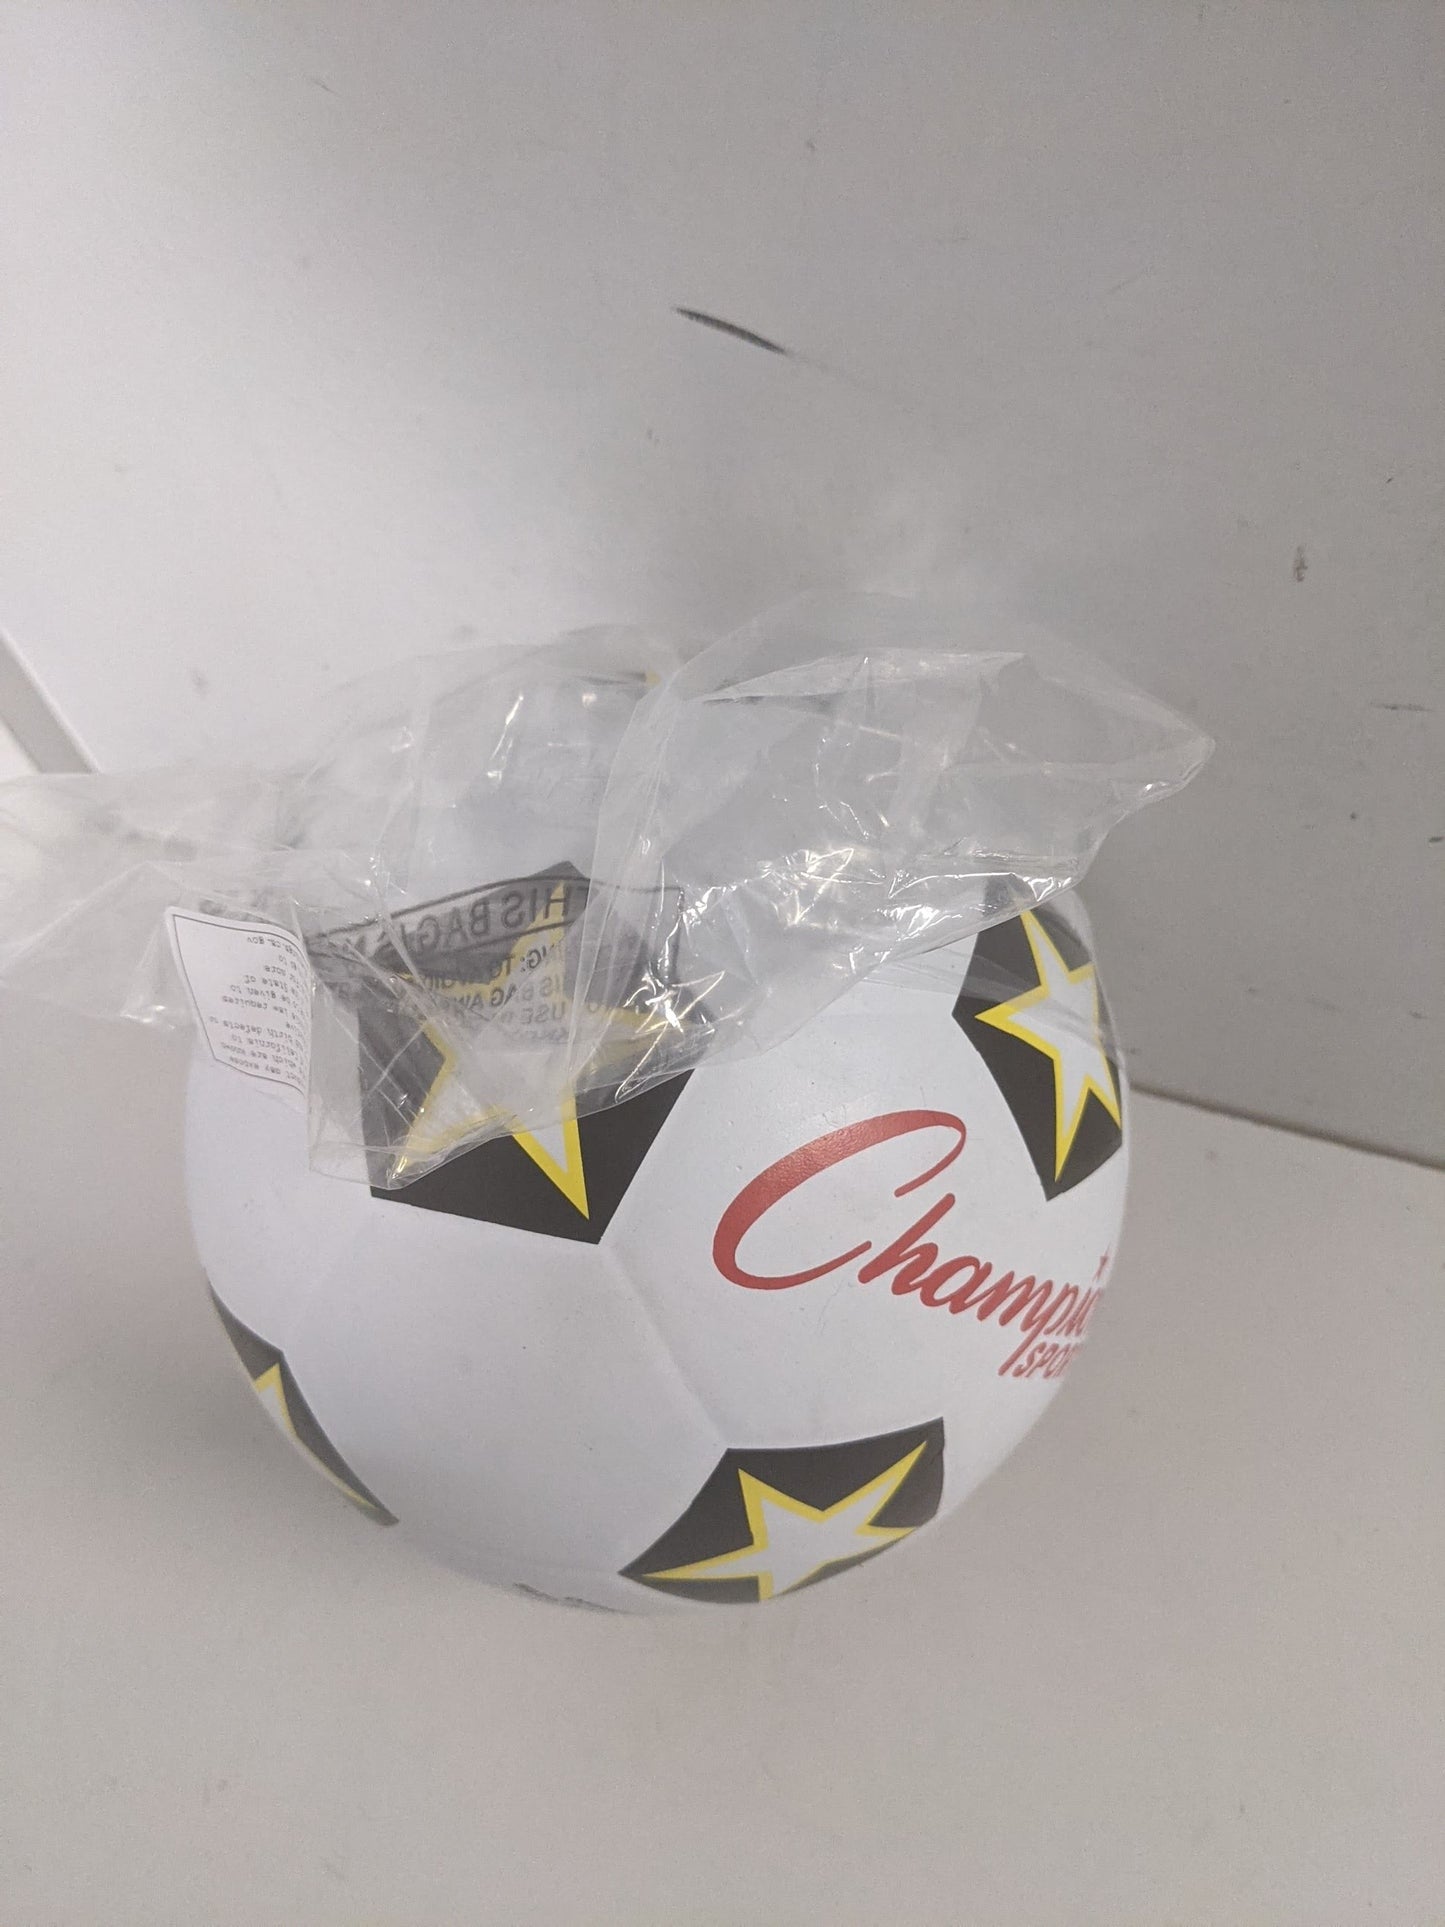 Champion Competition Soccer Ball Size 3 Black and White New